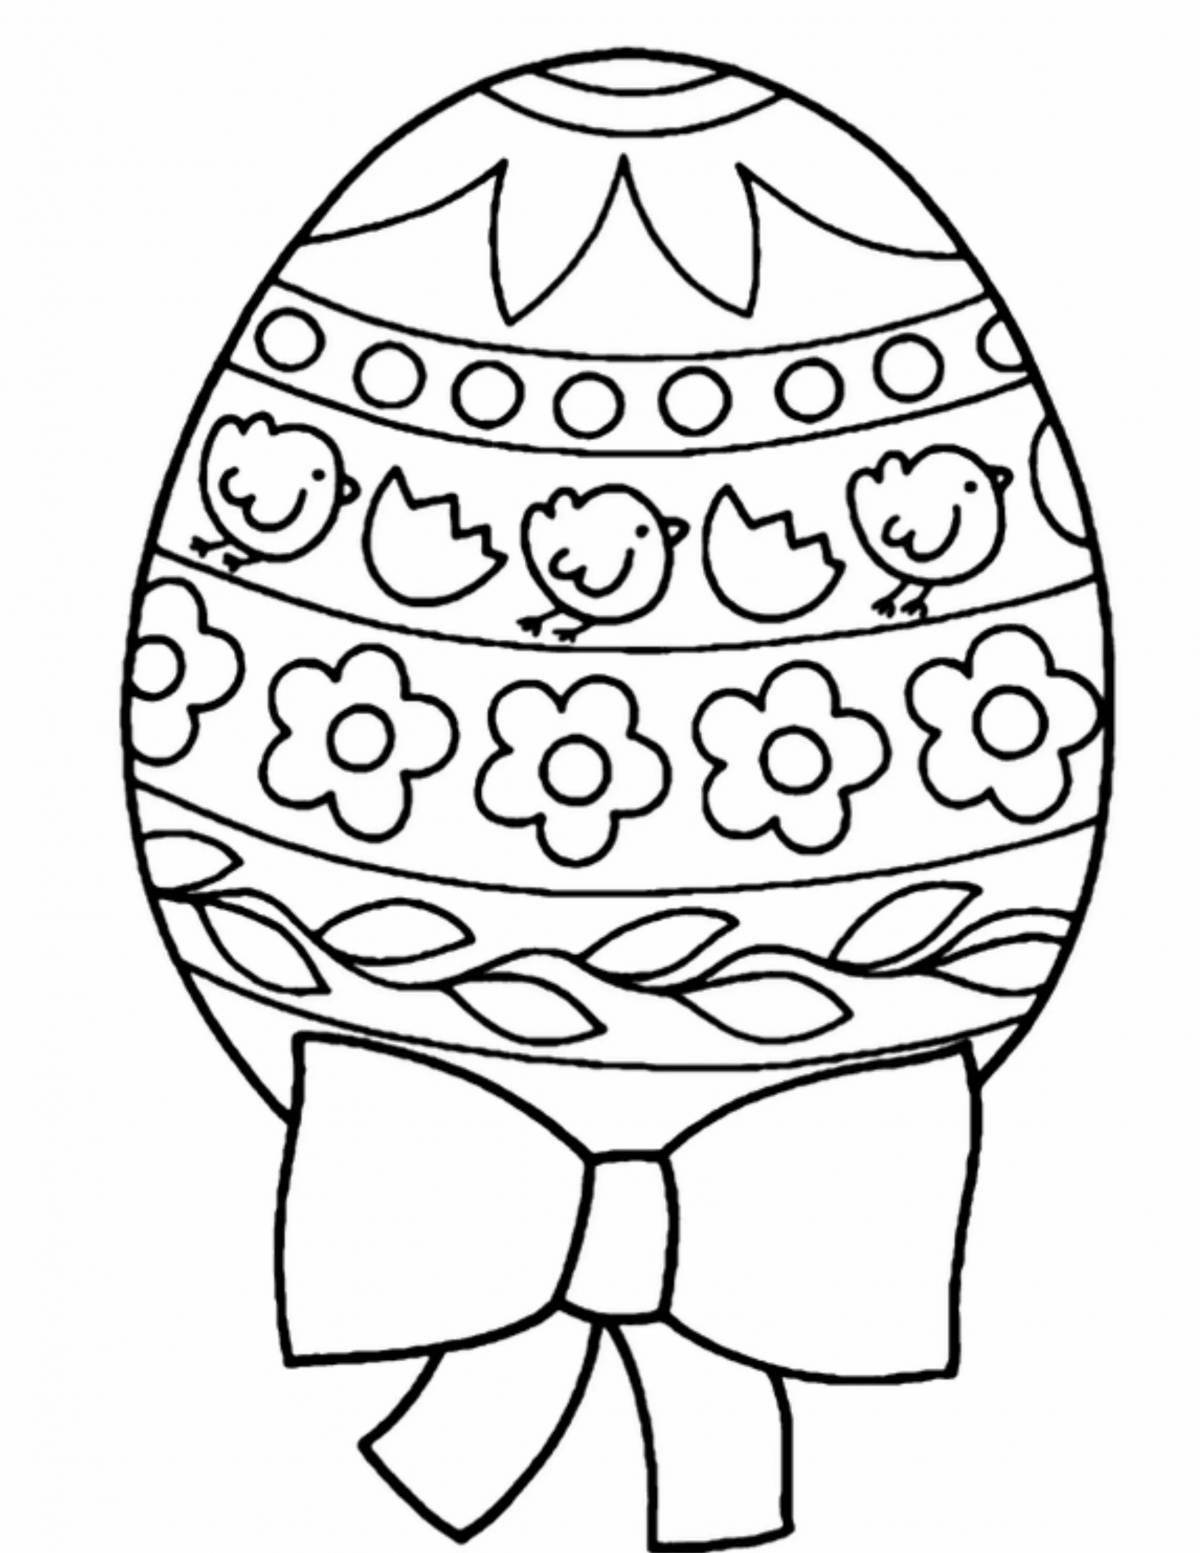 Attractive easter egg coloring page